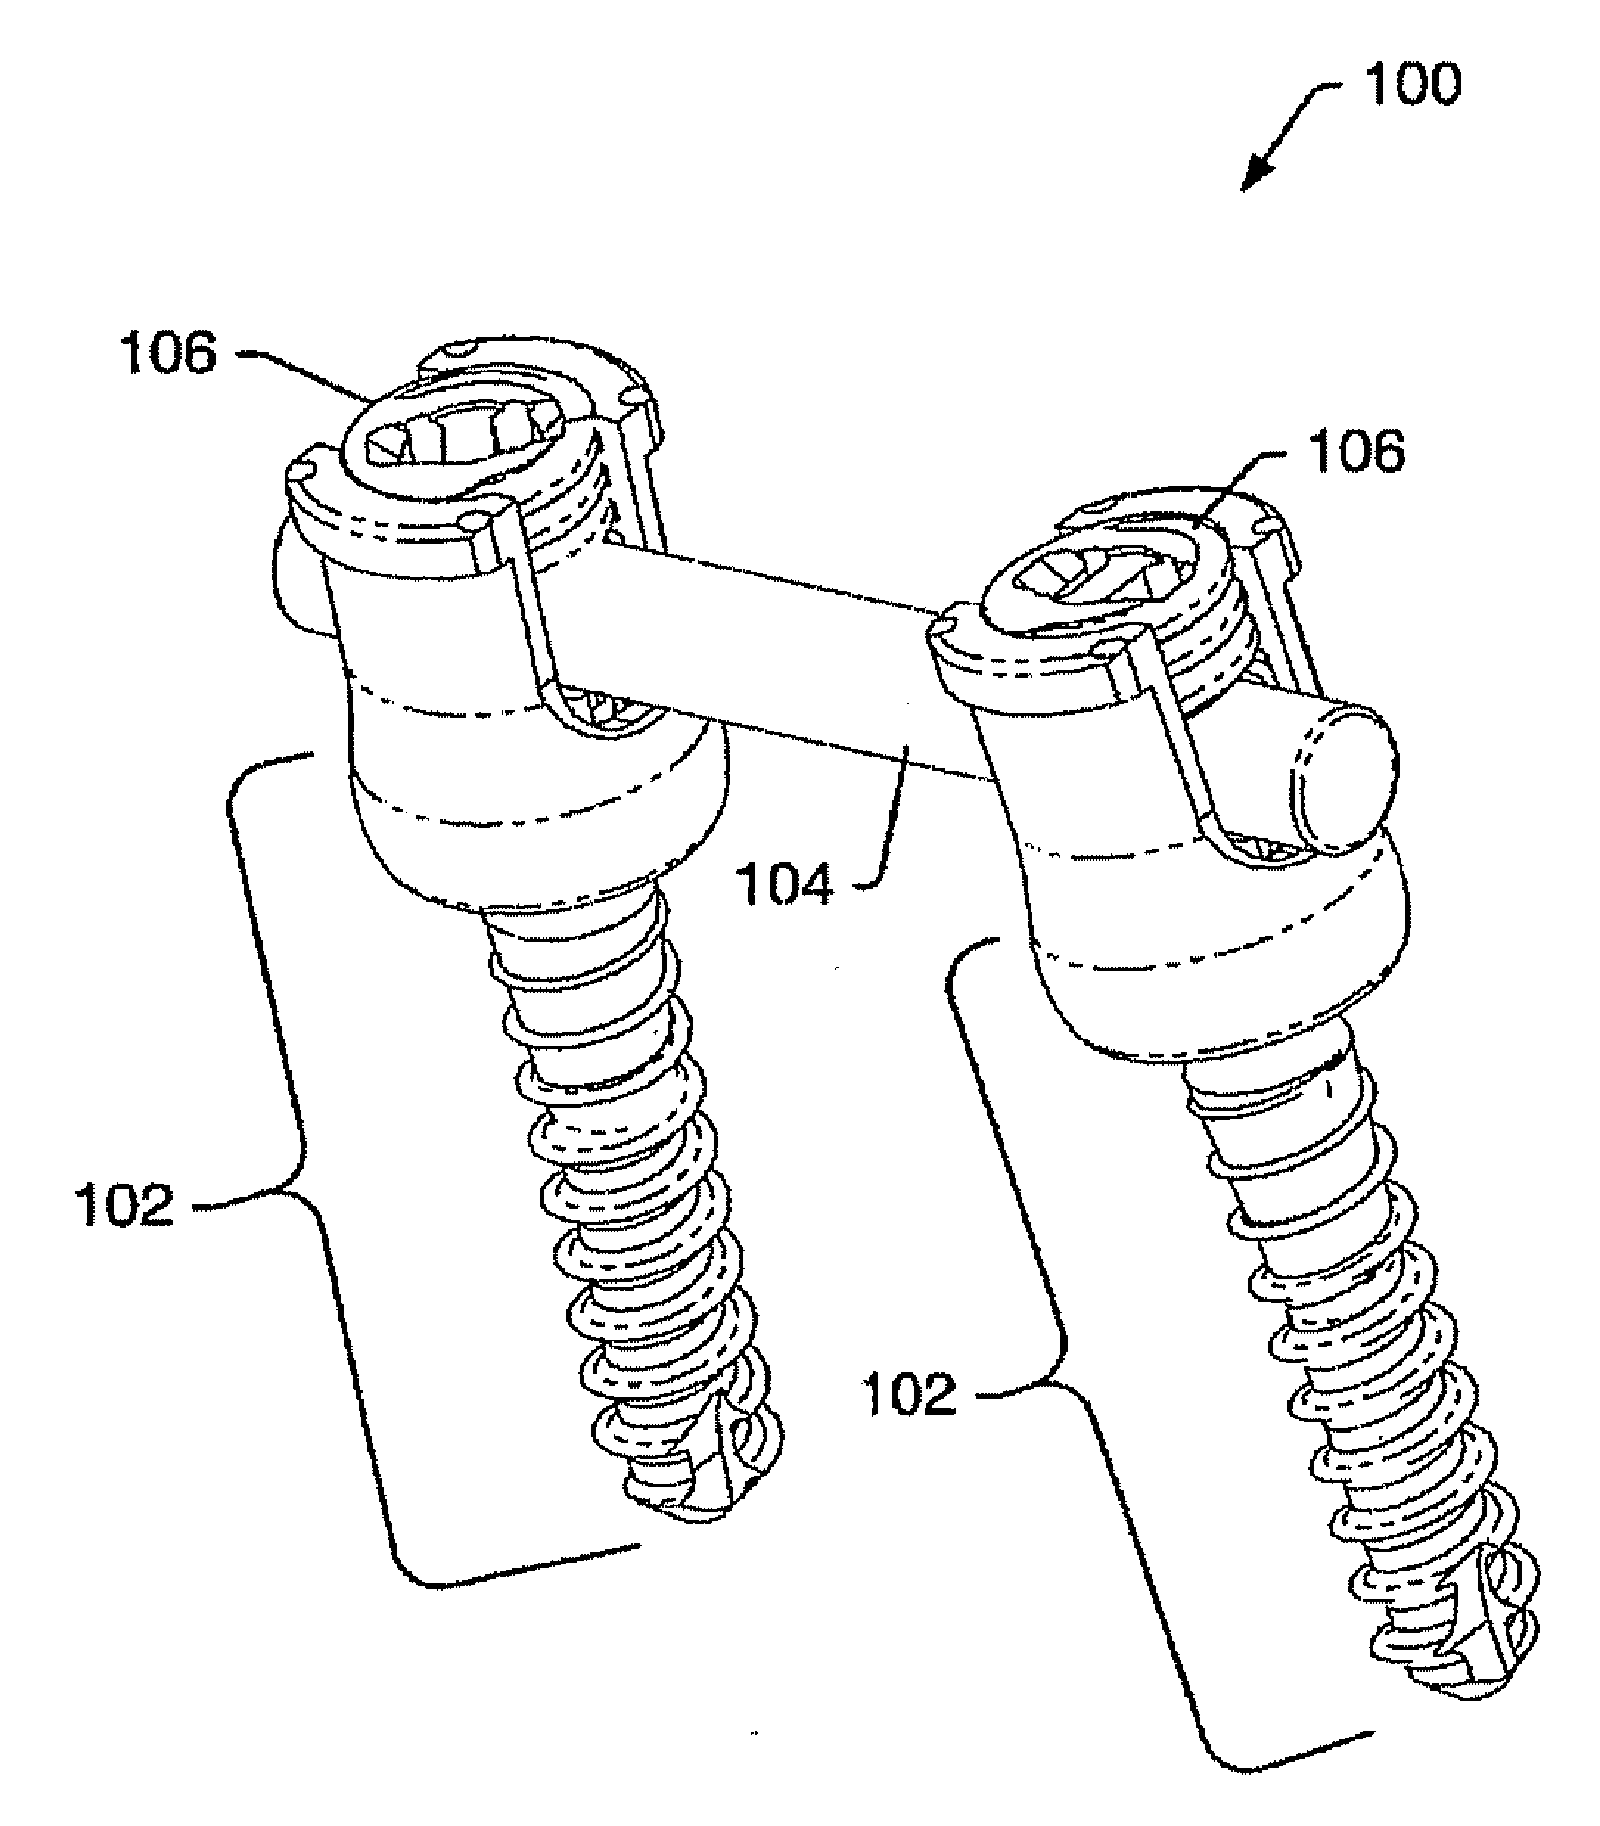 Device and system for implanting polyaxial bone fasteners